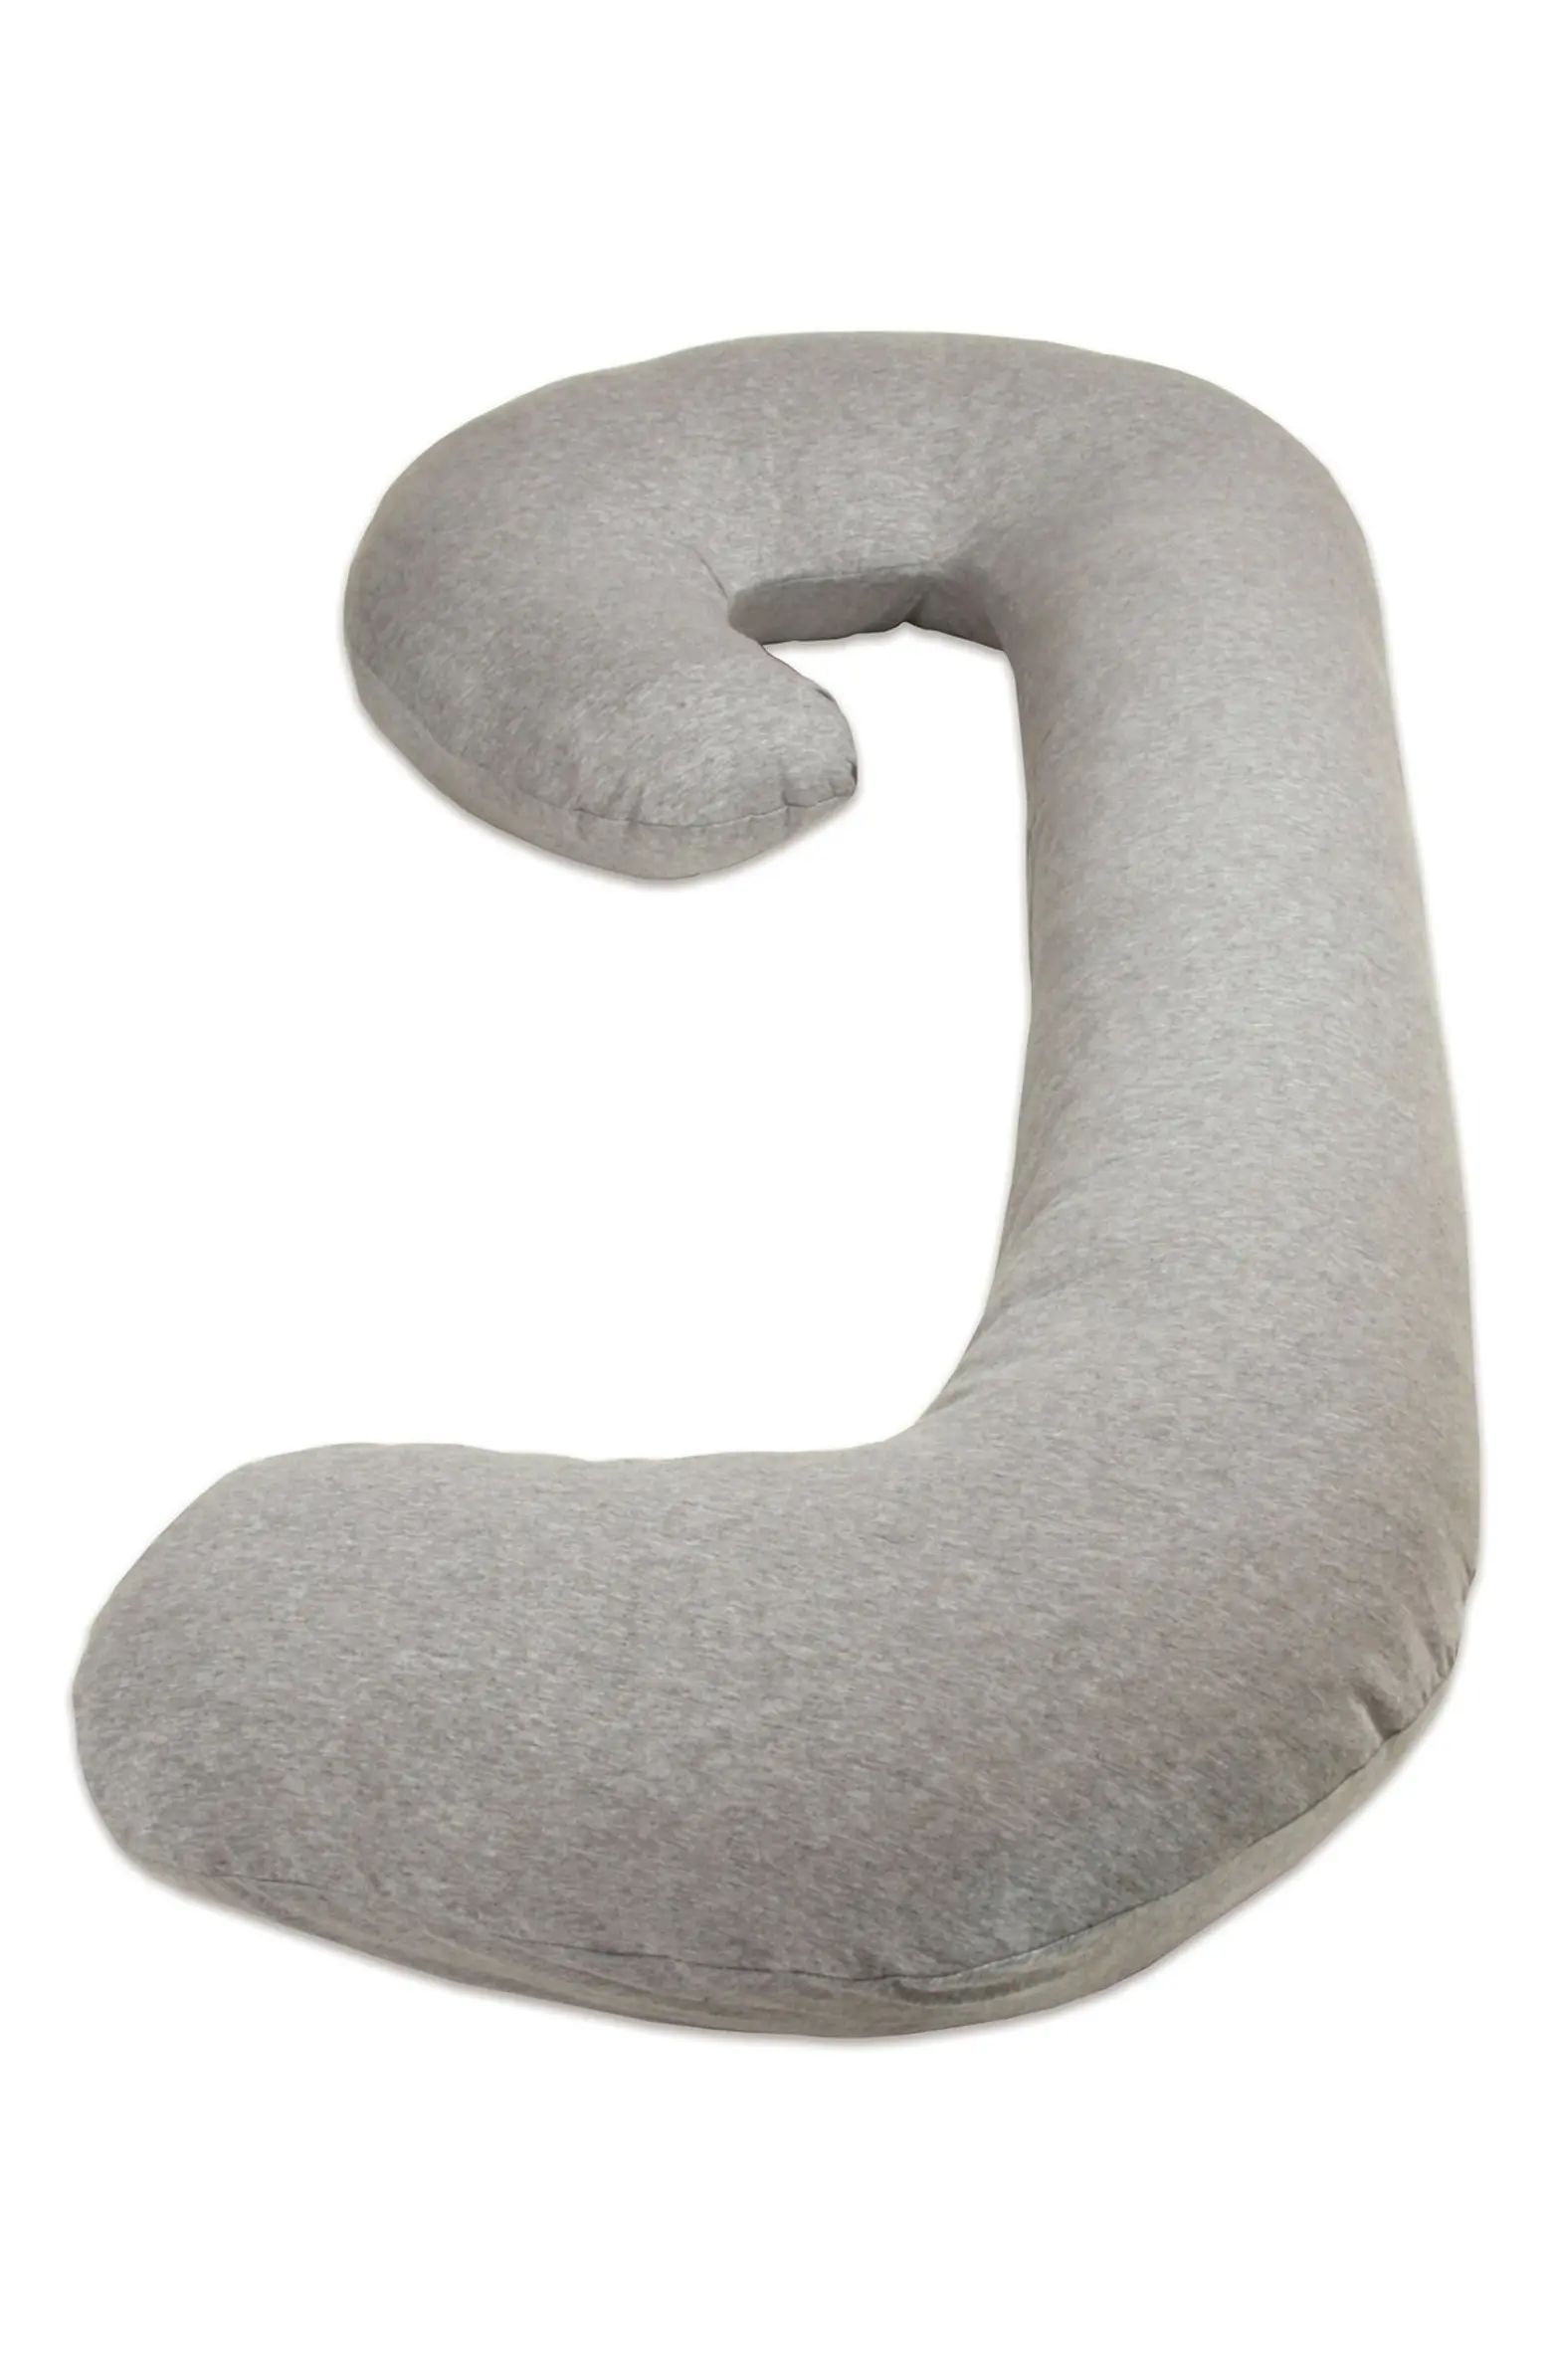 Snoogle Chic Full Body Pregnancy Support Pillow with Jersey Cover | Nordstrom